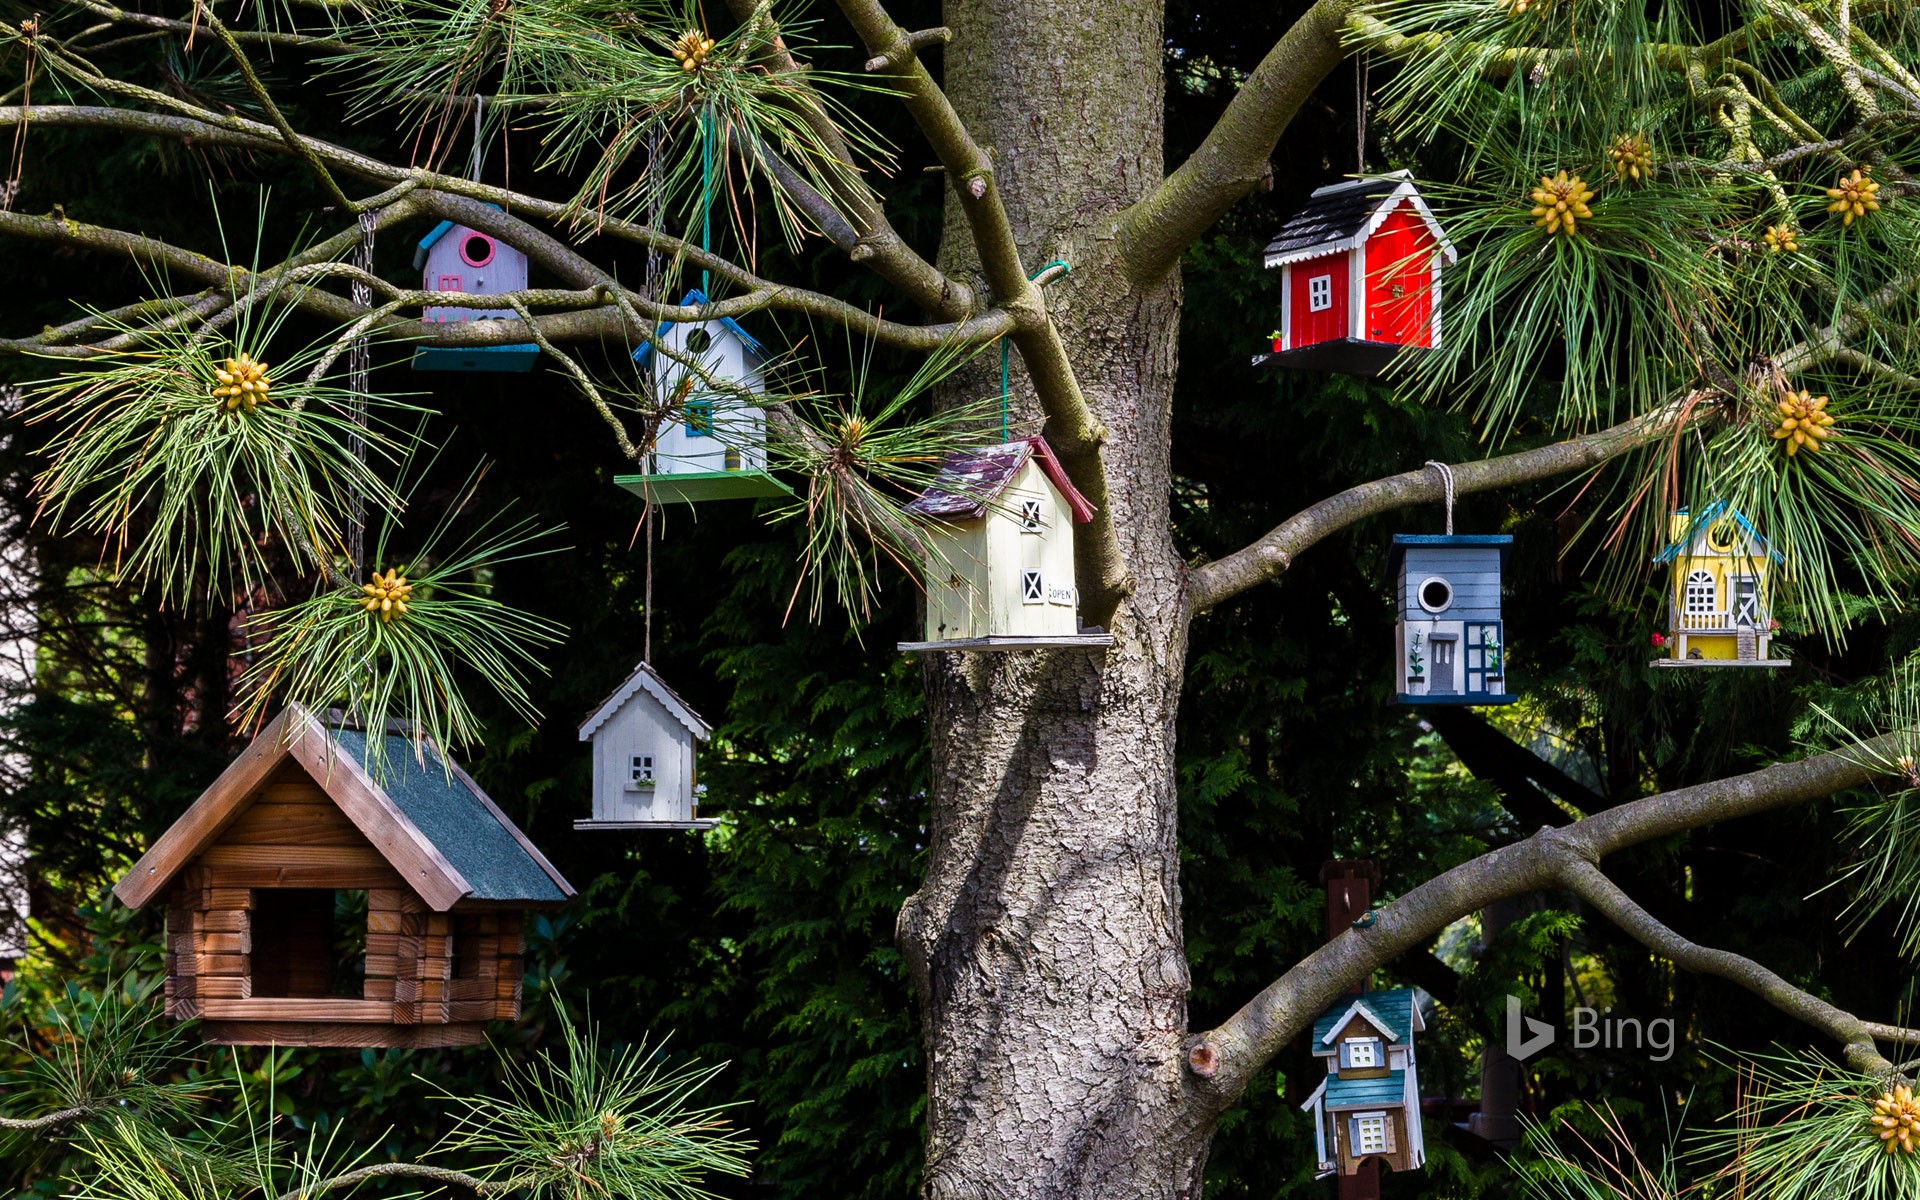 Birdhouses hanging in a tree